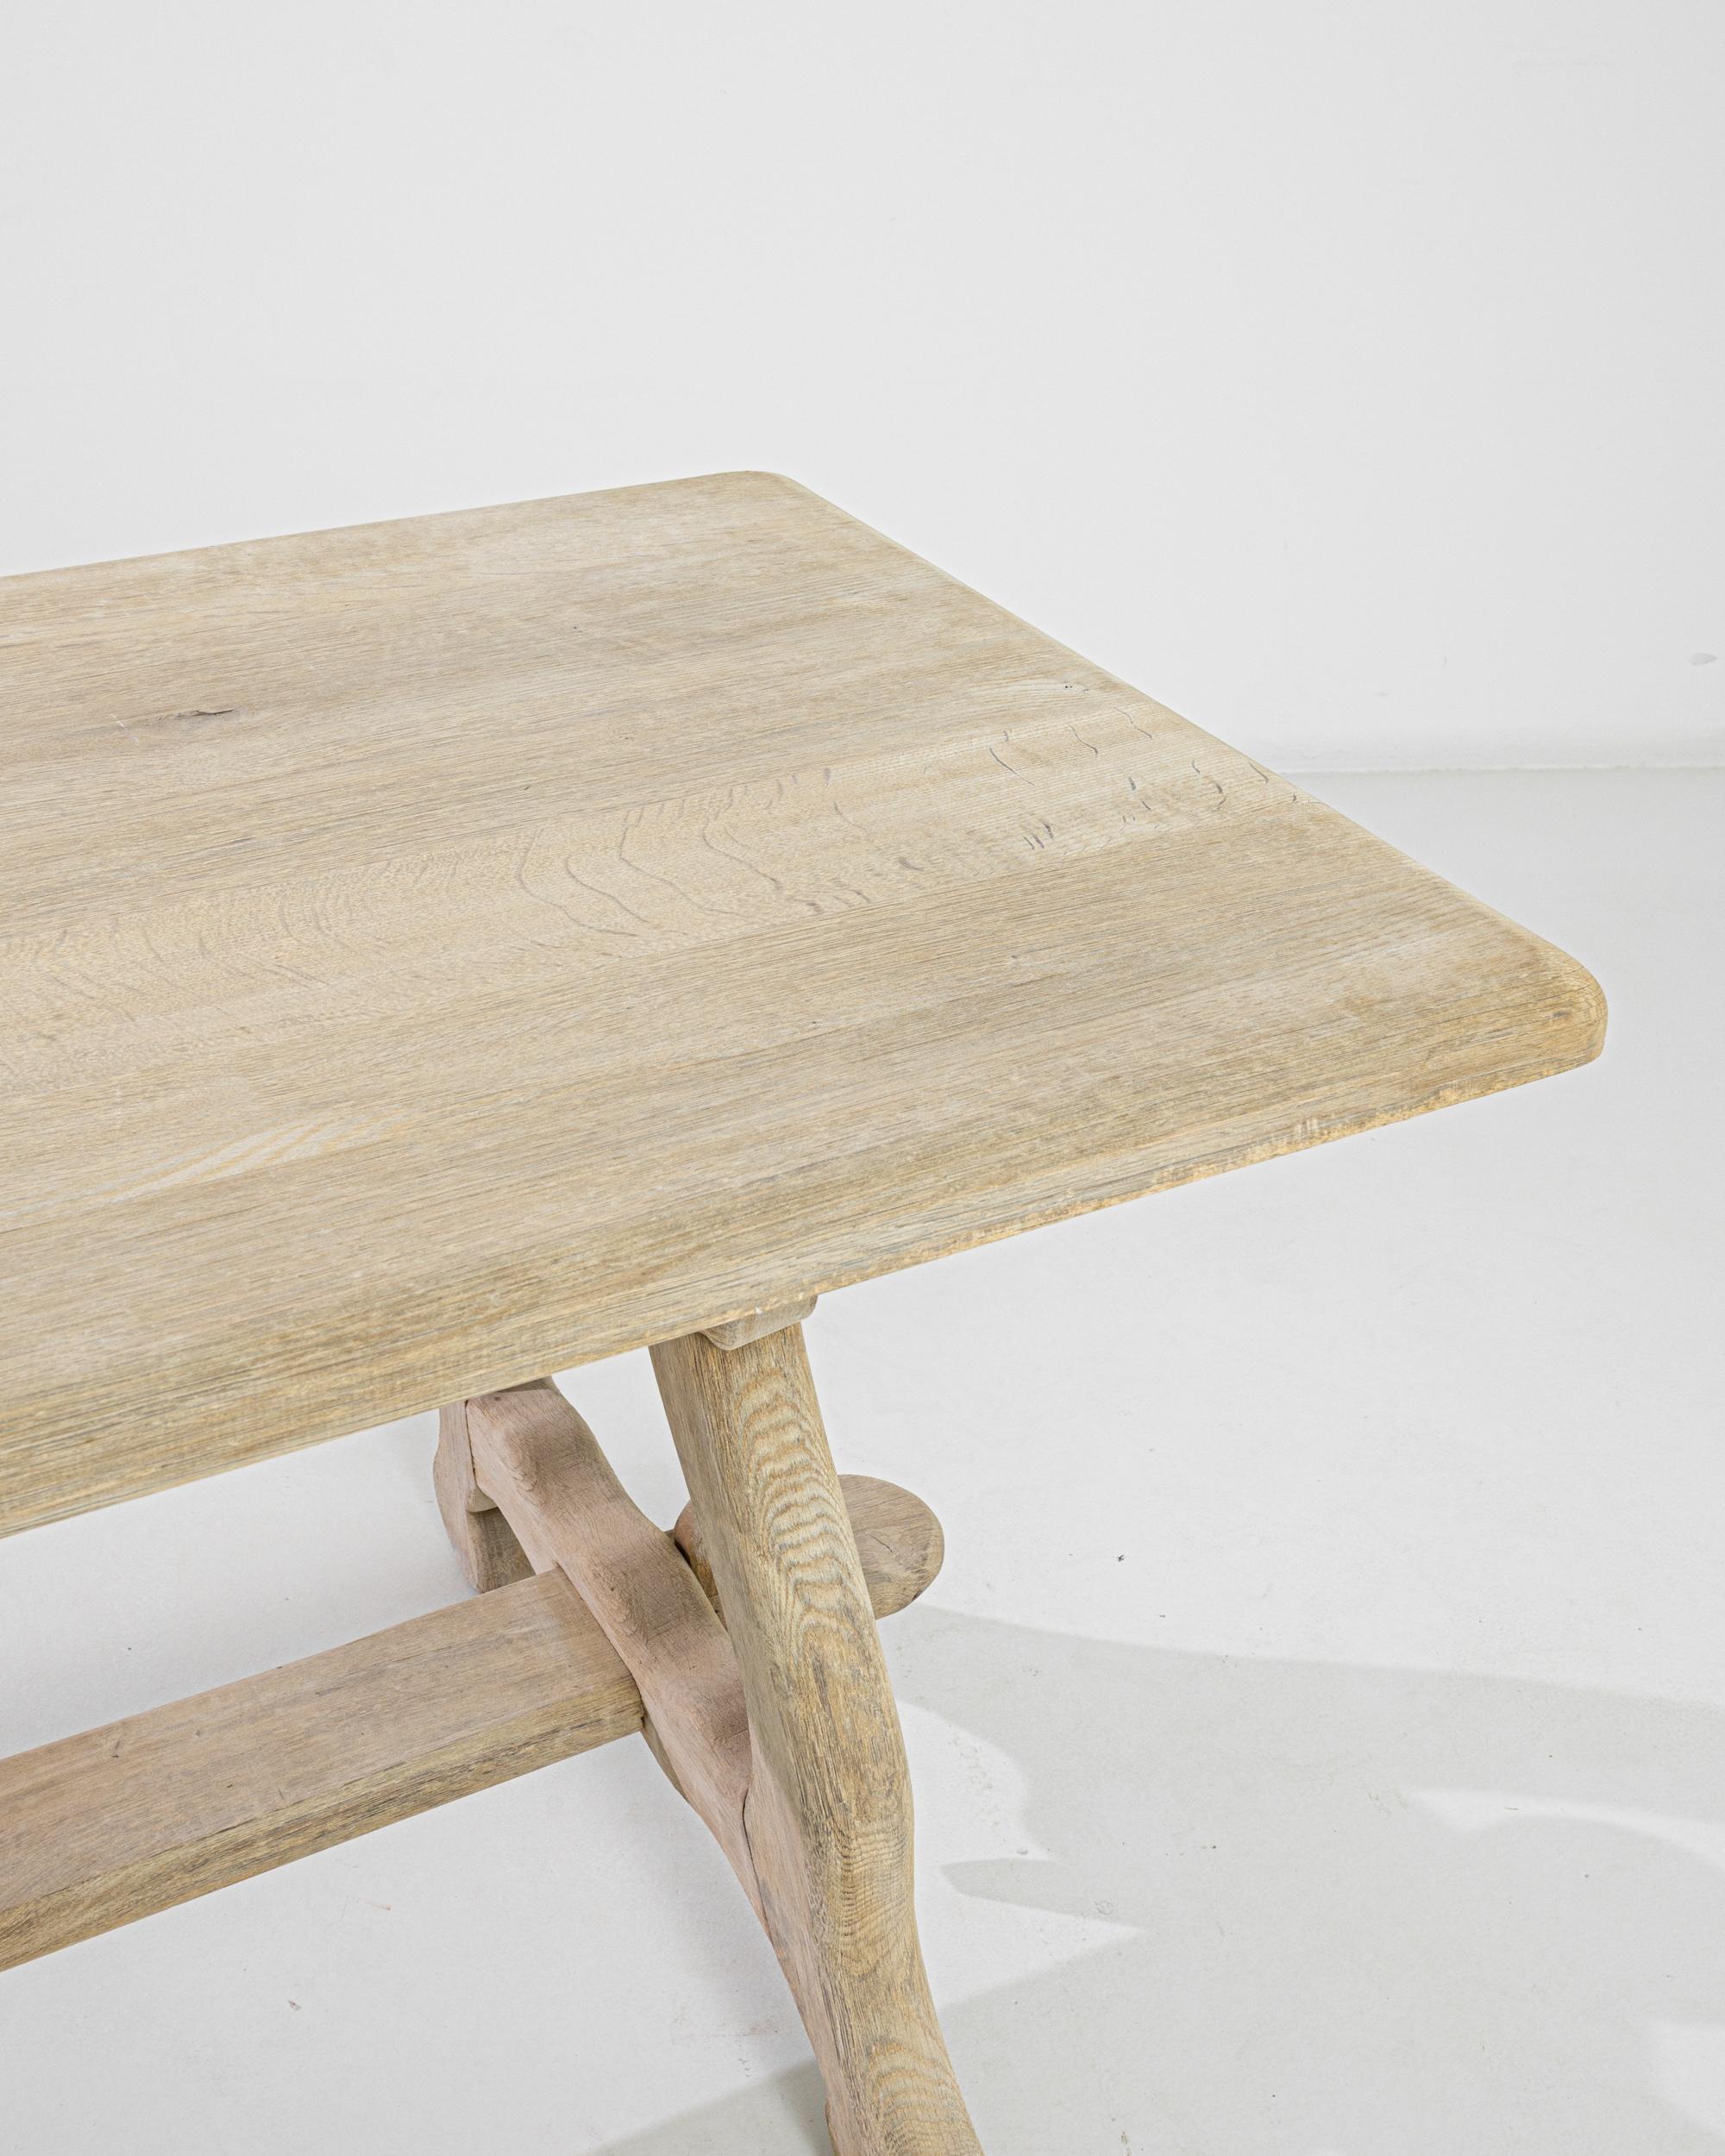 This bleached oak dining table was produced in Belgium, circa 1960. A wide rectangular top stands on sturdy carved feet, joined by a wedged middle stretcher with a mortise and tenon joint. Restored to a natural pale finish, the oak reveals organic